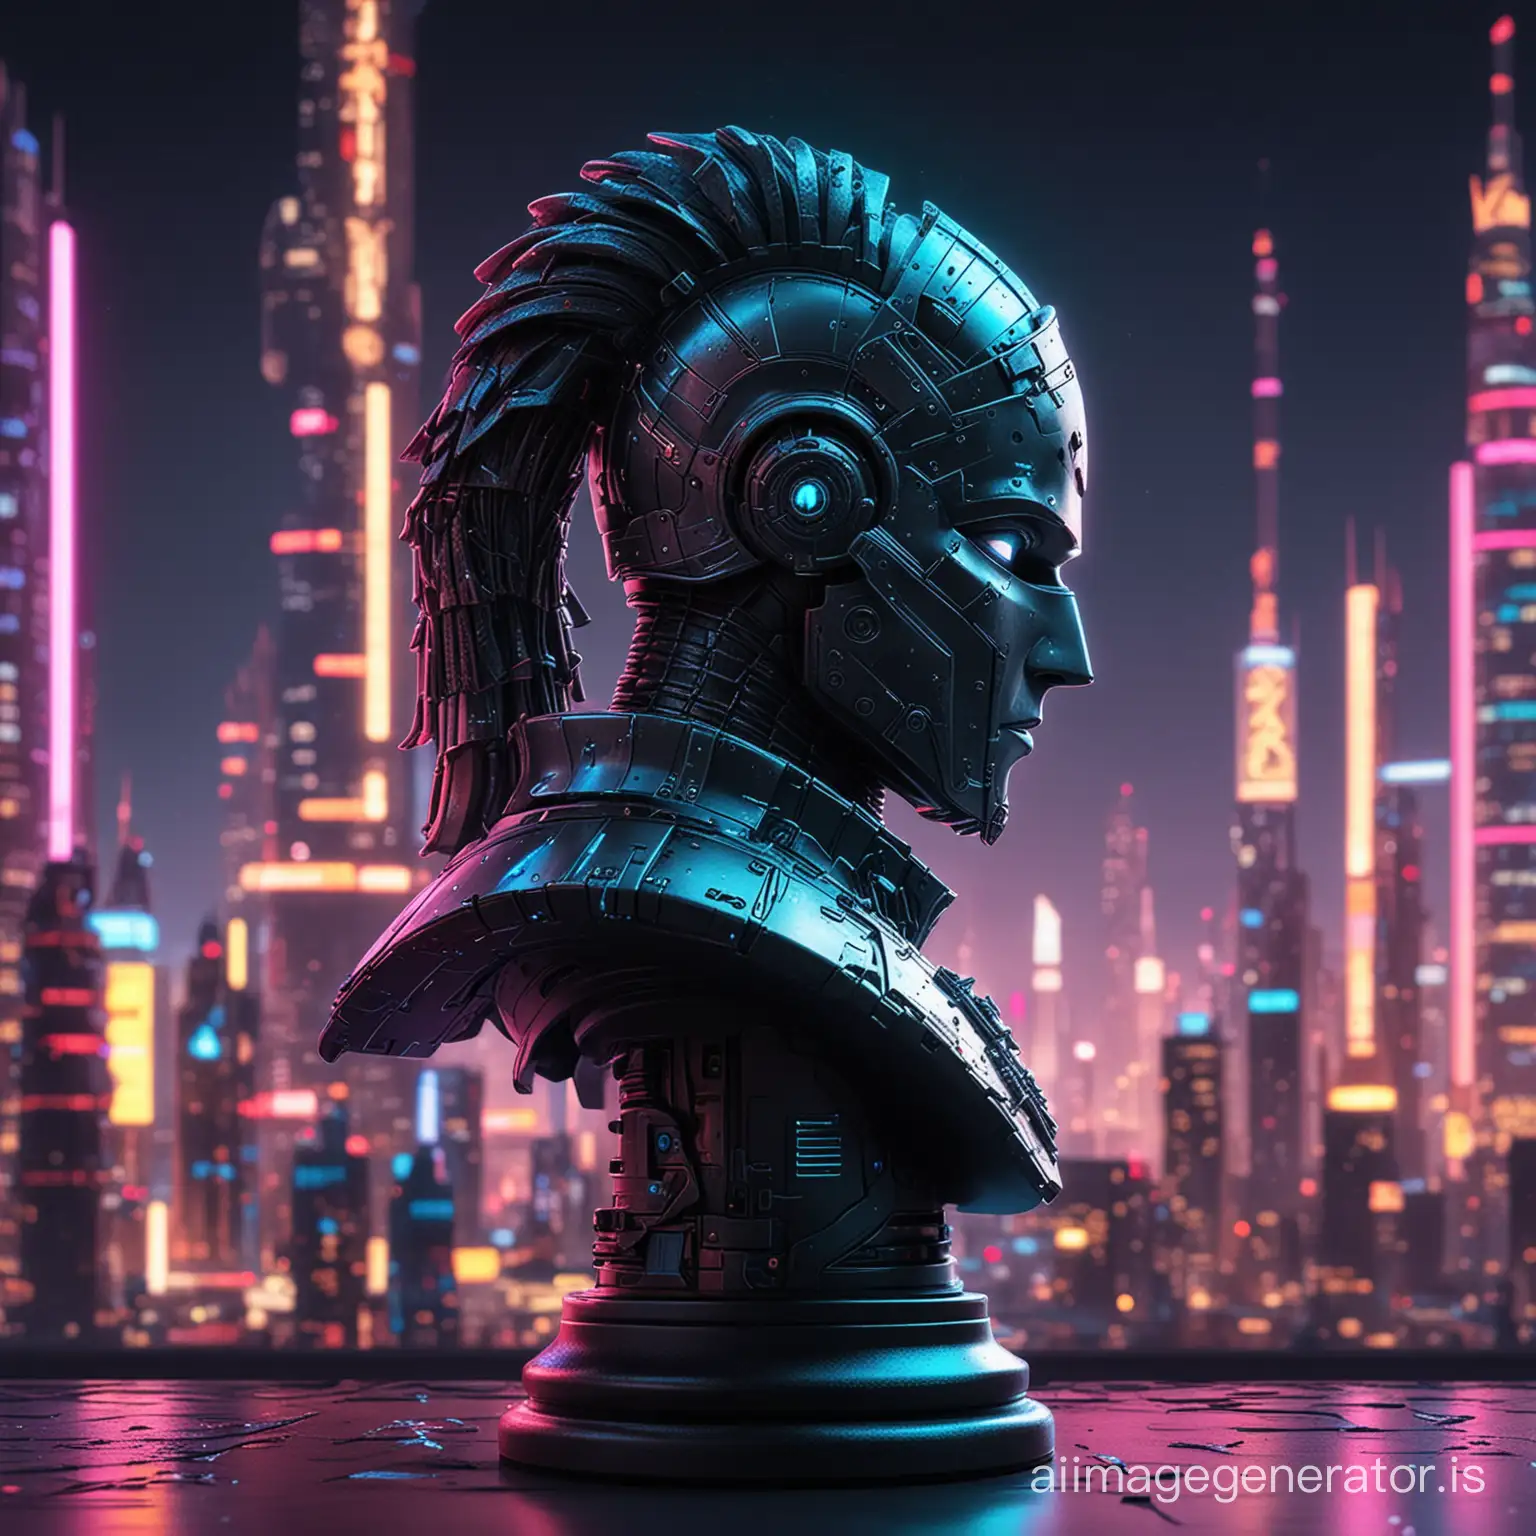 "Create a profile picture of a knight chess piece with a futuristic, cyberpunk twist, set against a backdrop of neon-lit cityscape."